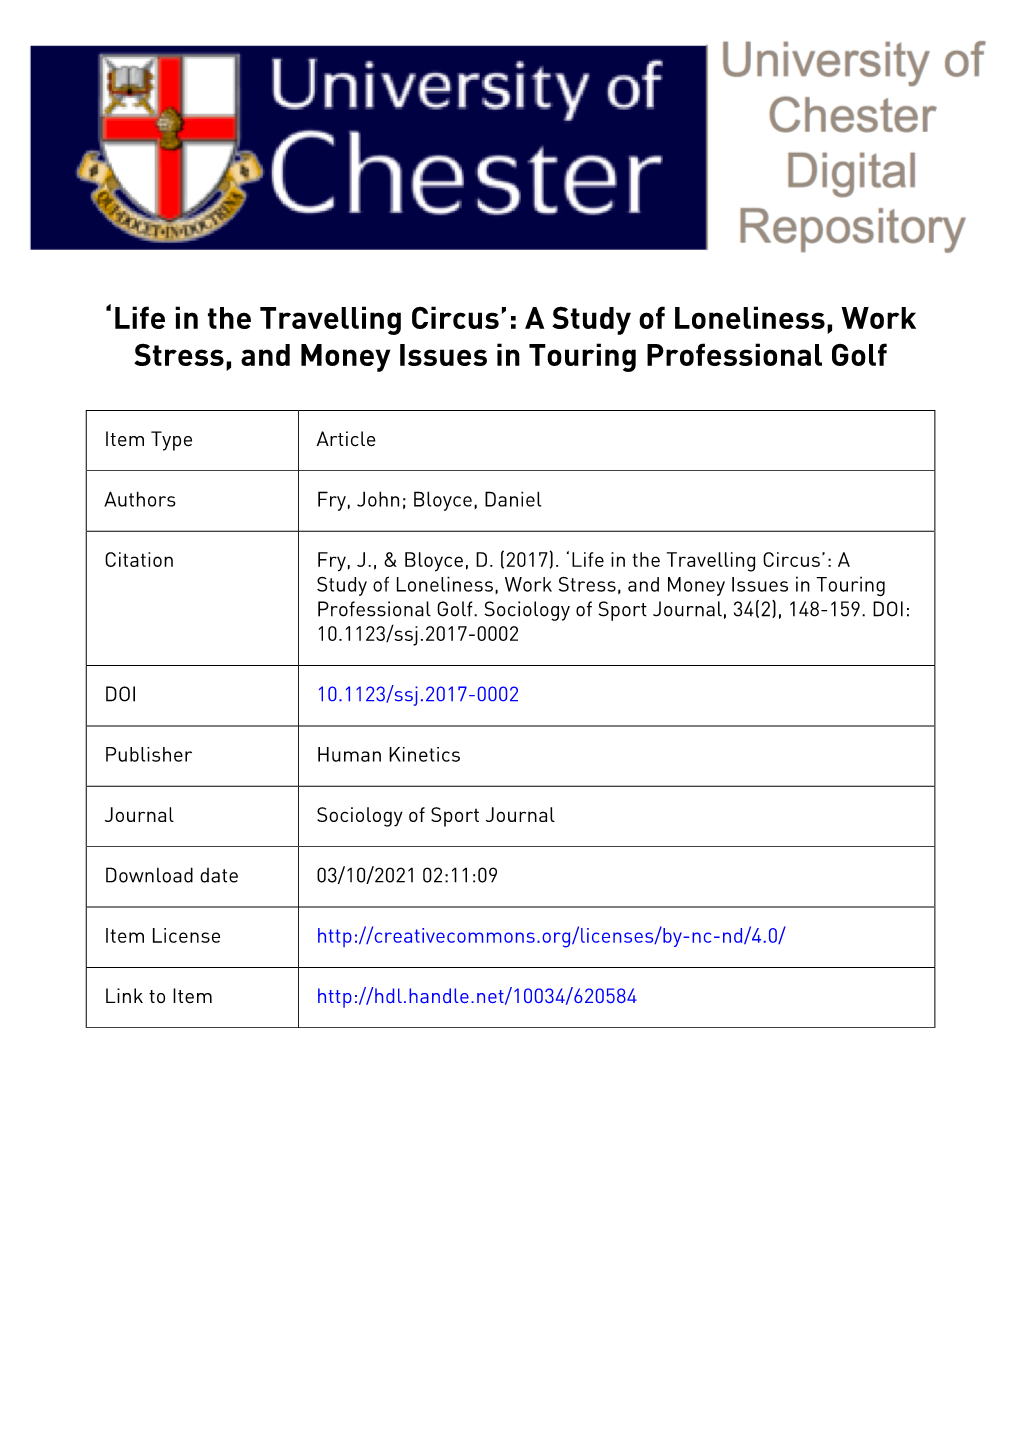 Life in the Travelling Circus’: a Study of Loneliness, Work Stress, and Money Issues in Touring Professional Golf